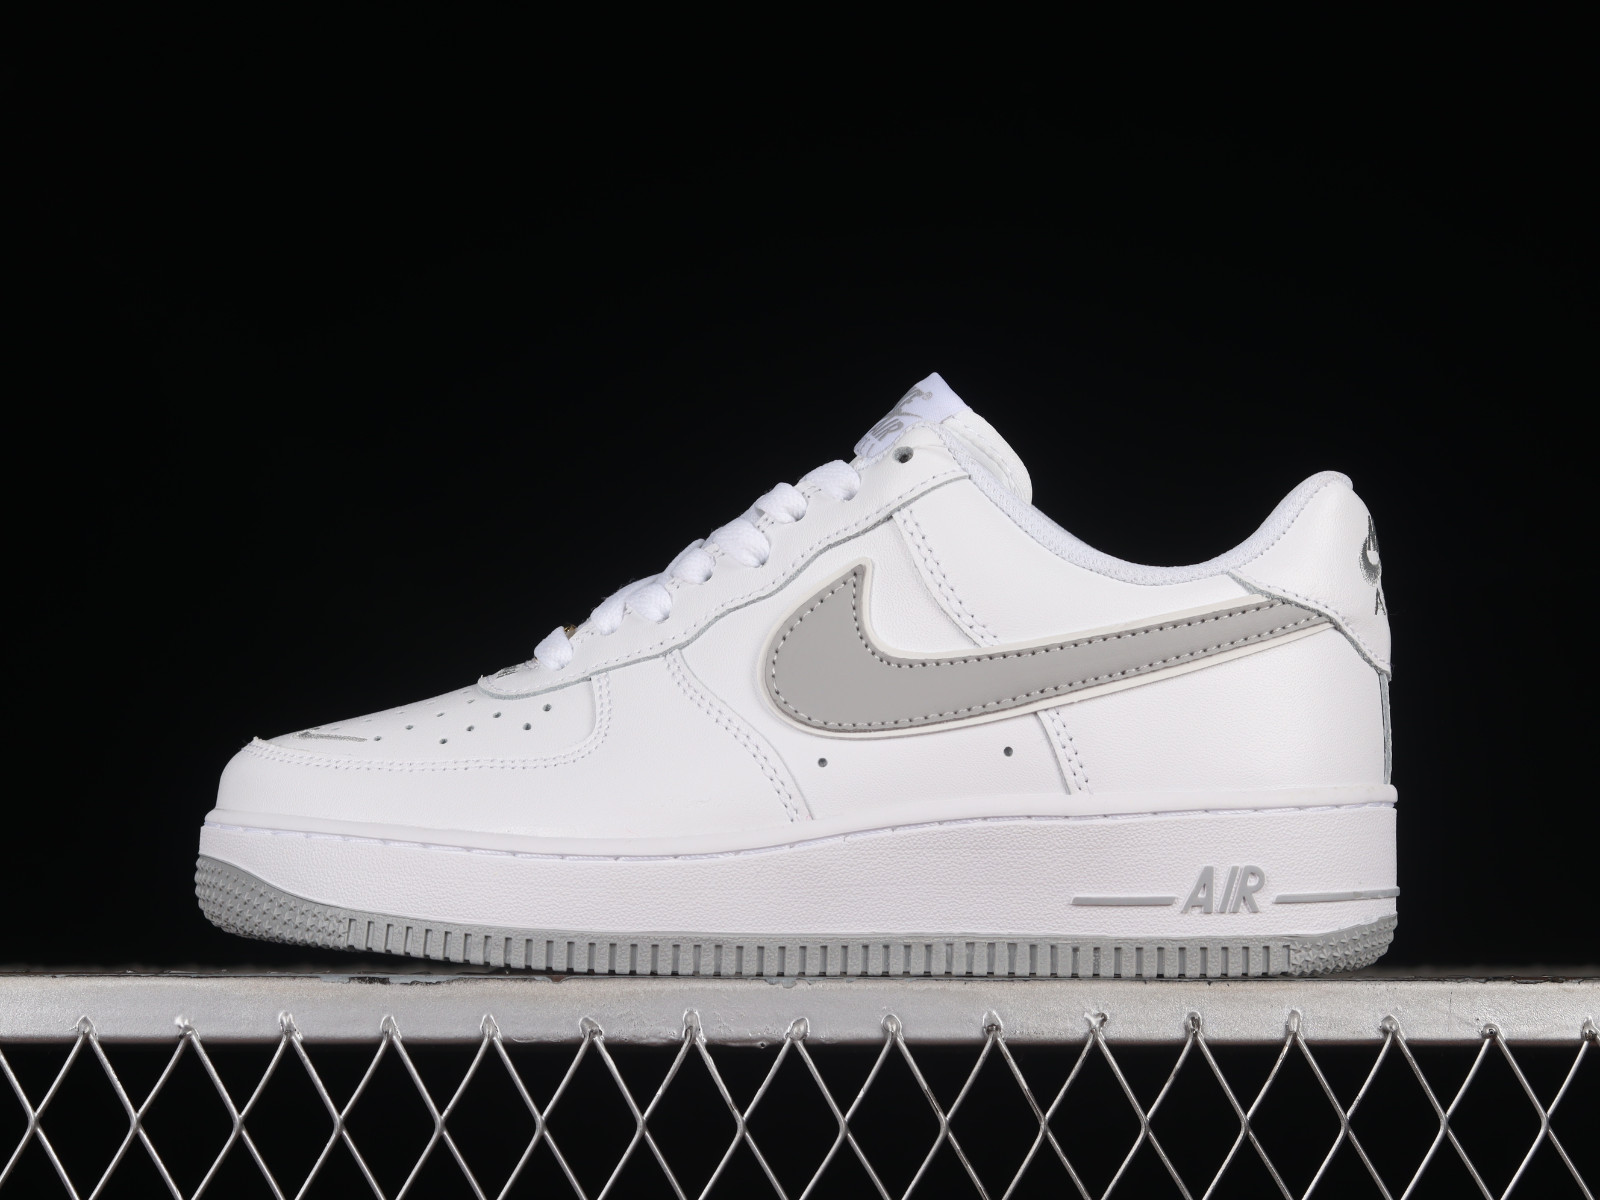 Reisbureau Tijd Groenland Nike Air Force 1 07 Low Swoosh White Grey CV5696 -  MultiscaleconsultingShops - nike shox r3 silver edition black gold sneakers  - 961